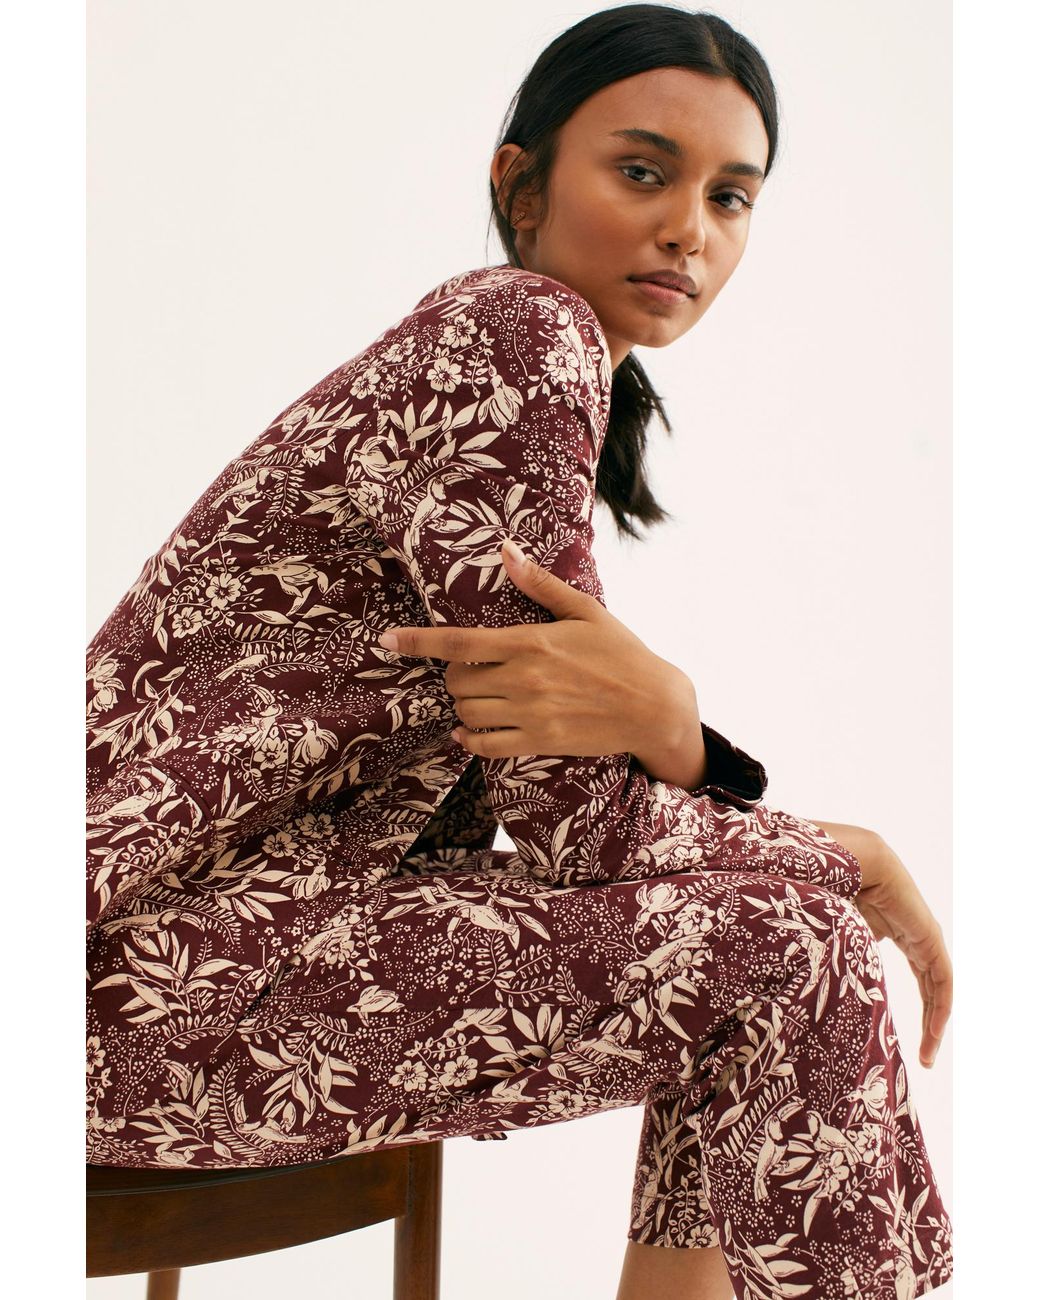 Free People Allover Printed Suit By Scotch & Soda | Lyst